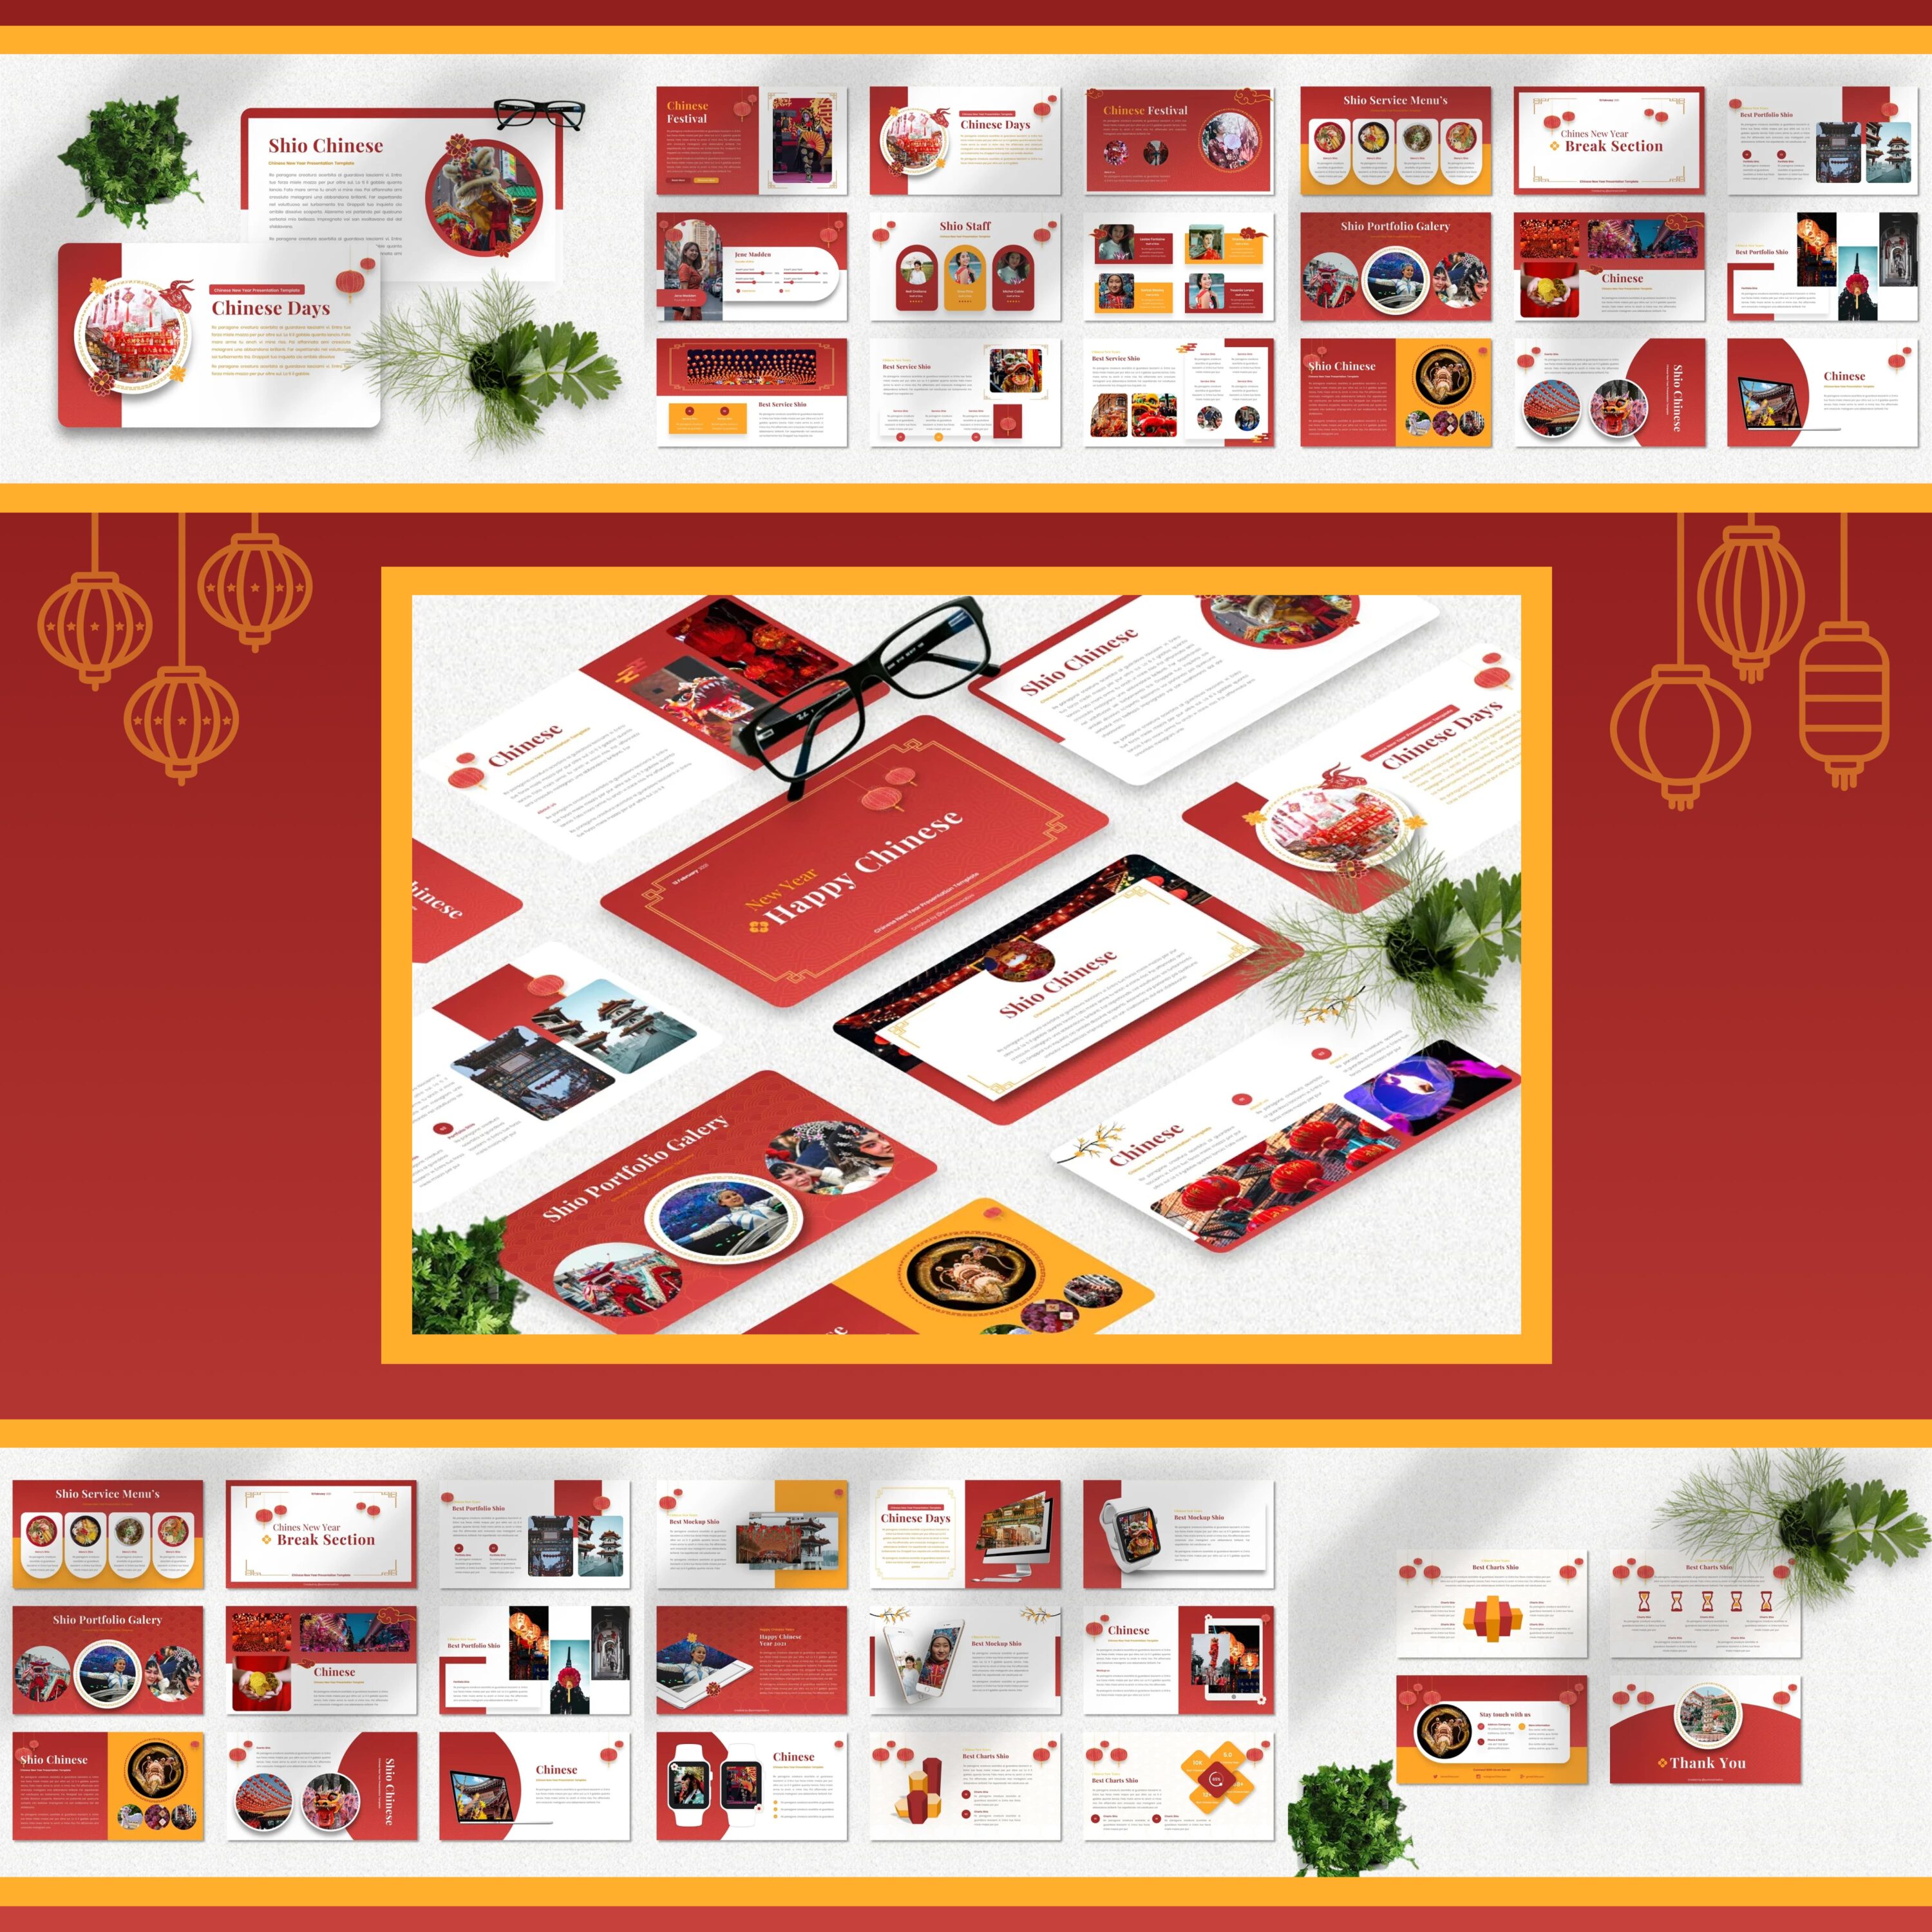 Shio - Chinese New Year Powerpoint cover.